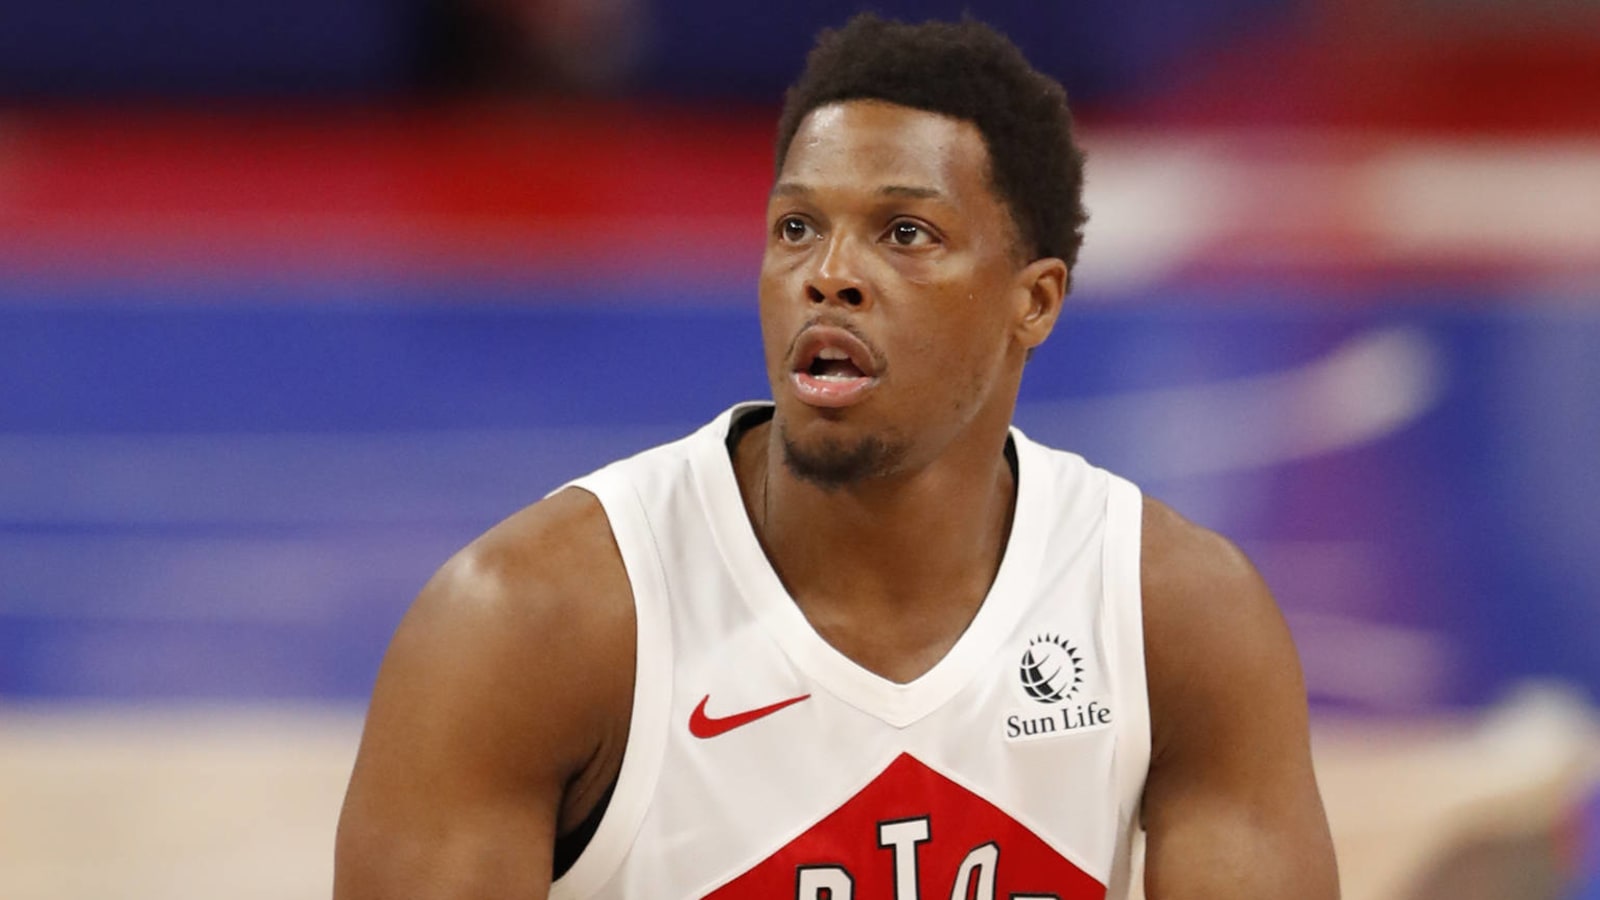 Kyle Lowry has to decide what's most important to him, and there's no wrong answer